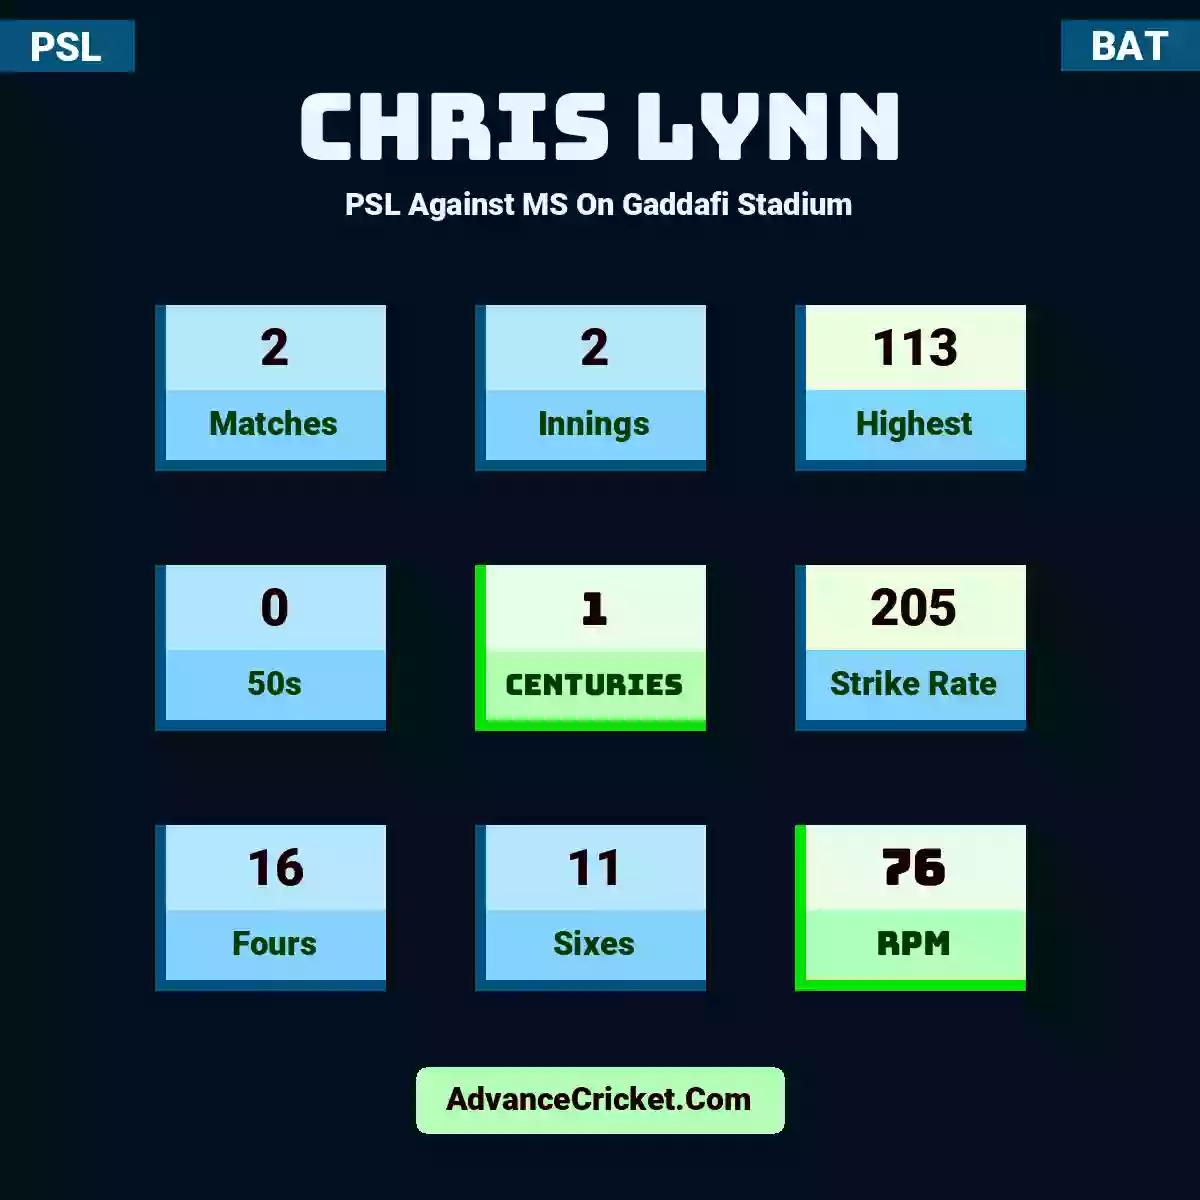 Chris Lynn PSL  Against MS On Gaddafi Stadium, Chris Lynn played 2 matches, scored 113 runs as highest, 0 half-centuries, and 1 centuries, with a strike rate of 205. C.Lynn hit 16 fours and 11 sixes, with an RPM of 76.